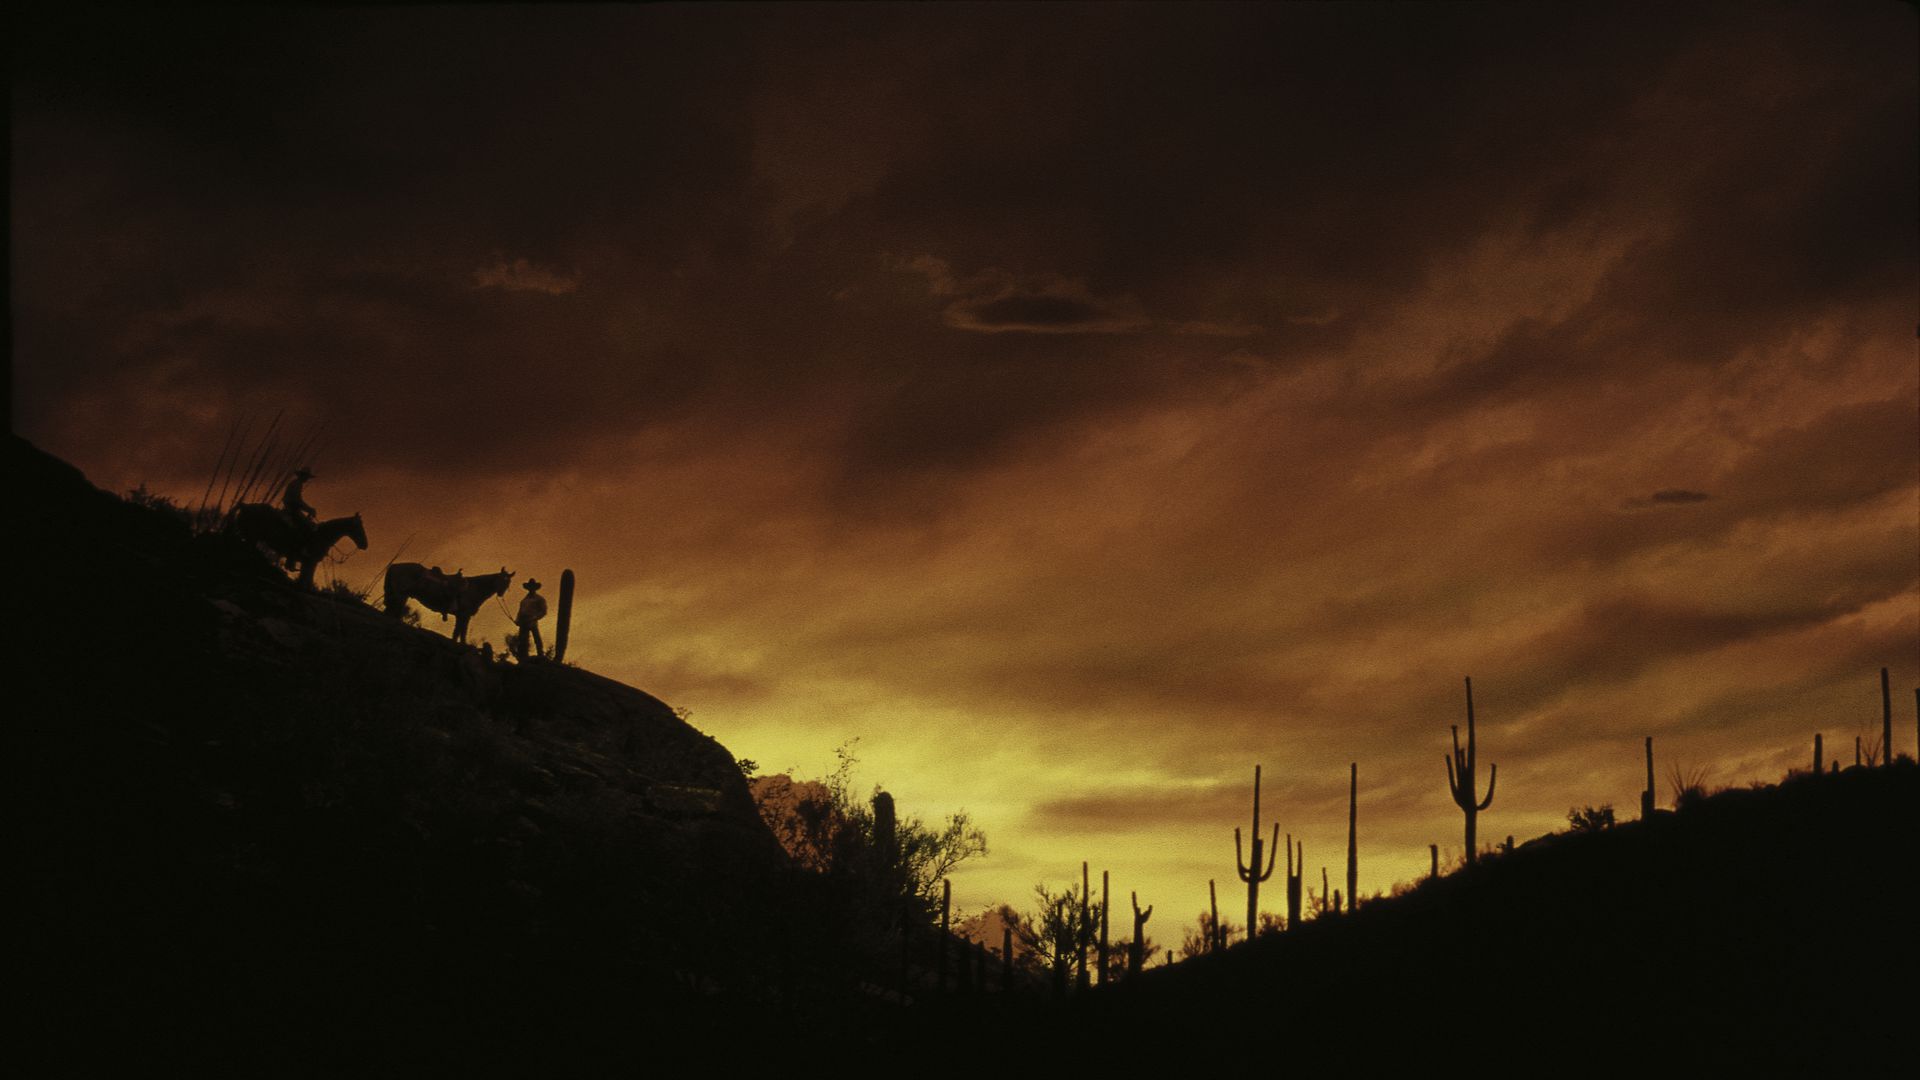 These are horseback riders at sunset in the Sonoran Desert. They are in silhouette surrounded by the Tucson Mountains.